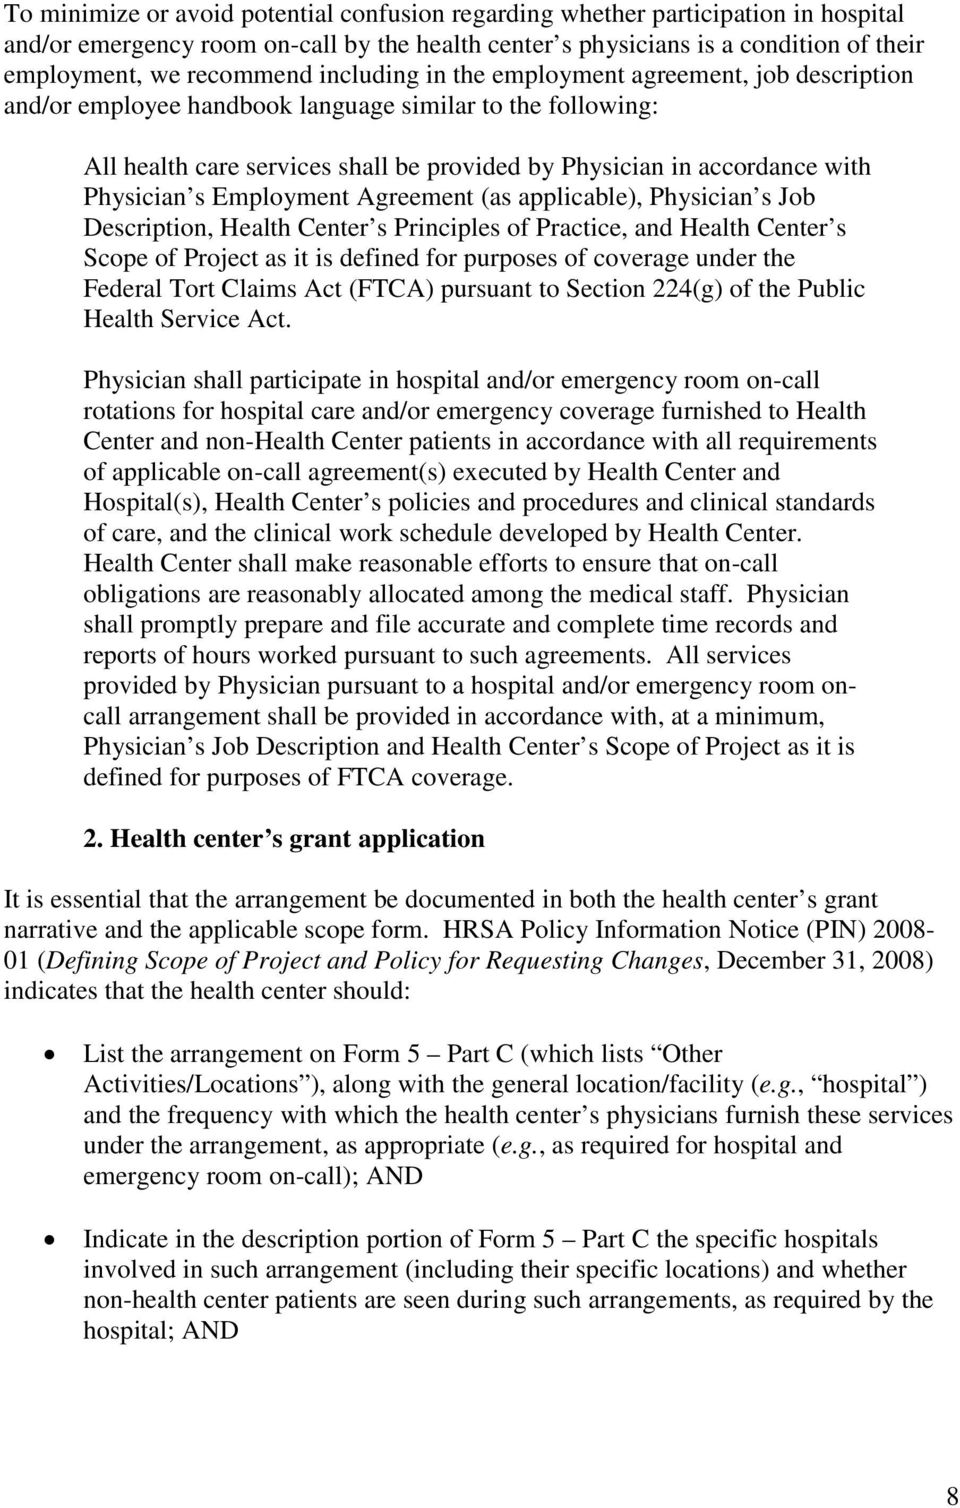 s Employment Agreement (as applicable), Physician s Job Description, Health Center s Principles of Practice, and Health Center s Scope of Project as it is defined for purposes of coverage under the